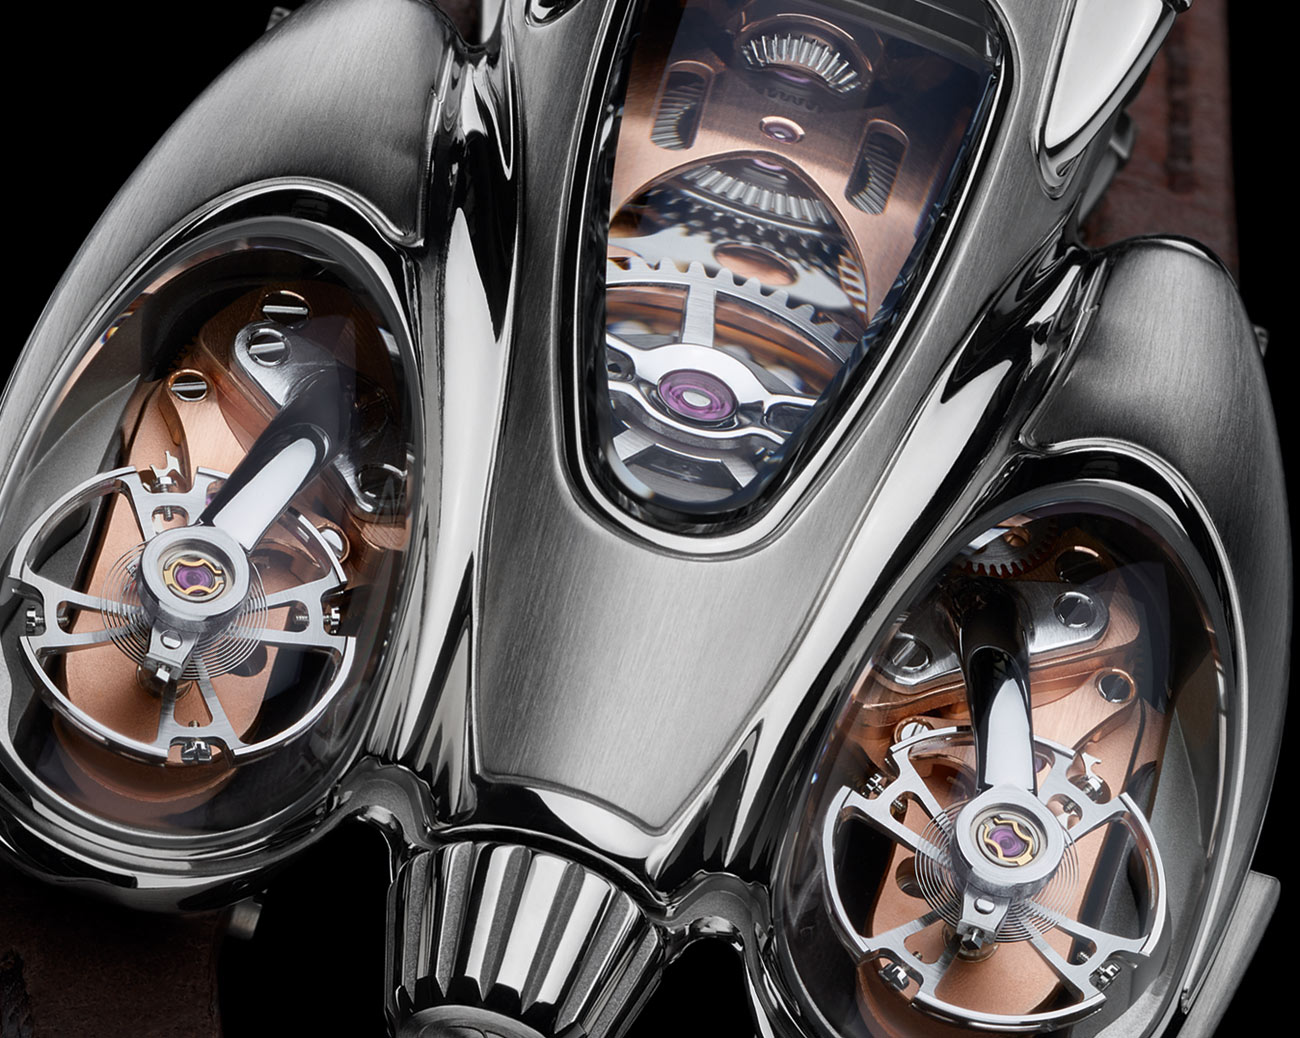 MB&F's new Horological Machine No. 9 Flow watches MBF-Horological-Machine-No-9-HM9-Flow-Air-Road-aBlogtoWatch-7